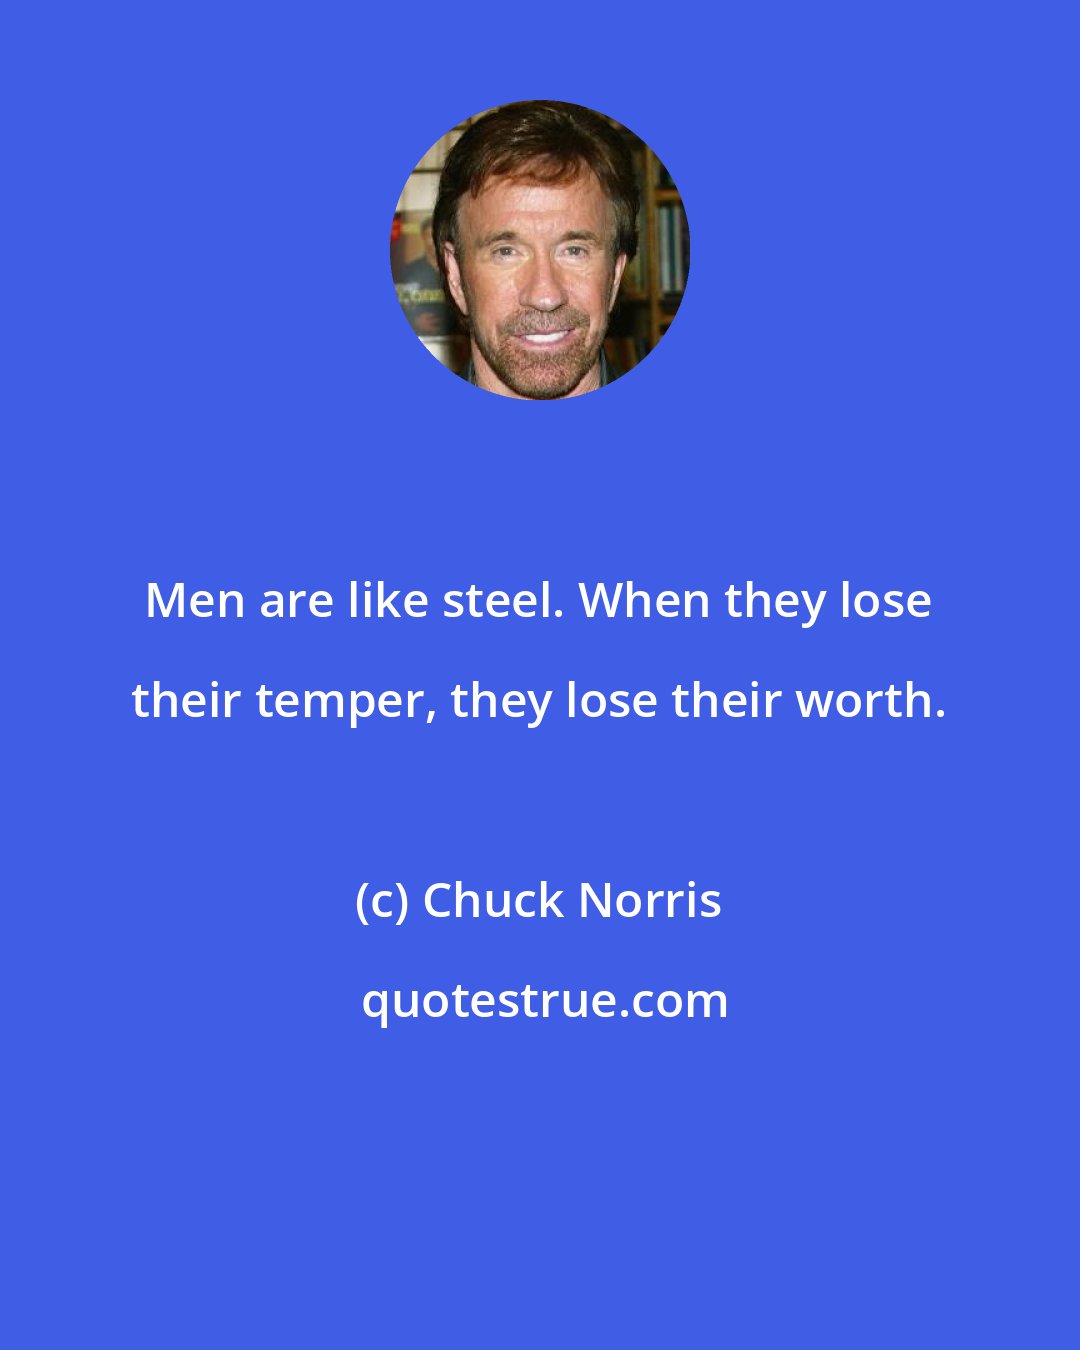 Chuck Norris: Men are like steel. When they lose their temper, they lose their worth.